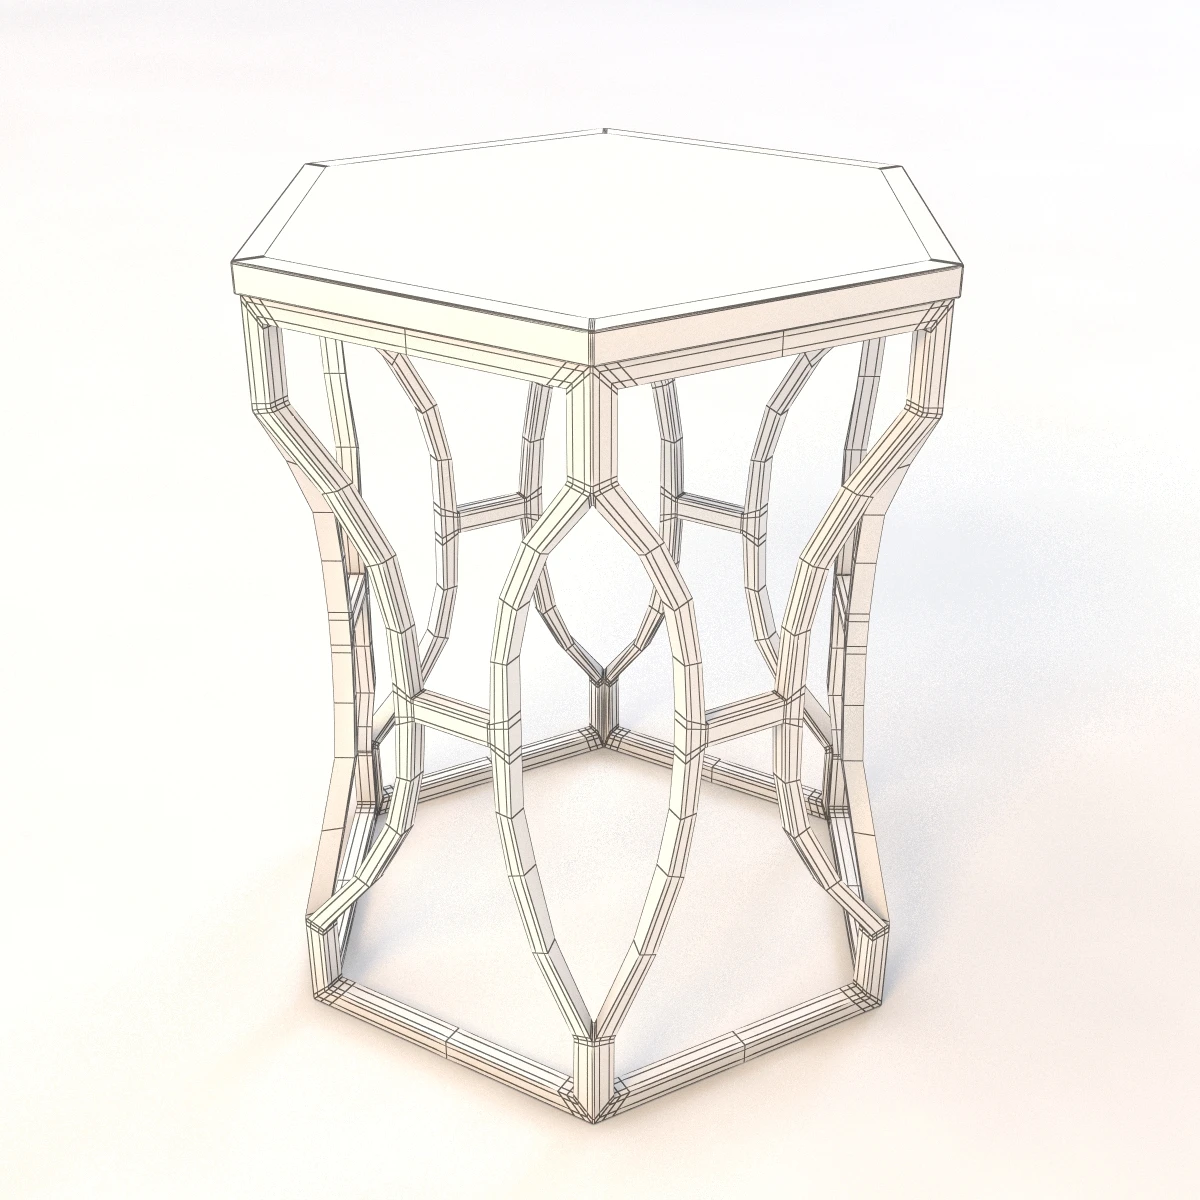 Roja Antique Gold Leaf Cream Marble Hexagonal Side Table 3D Model_09